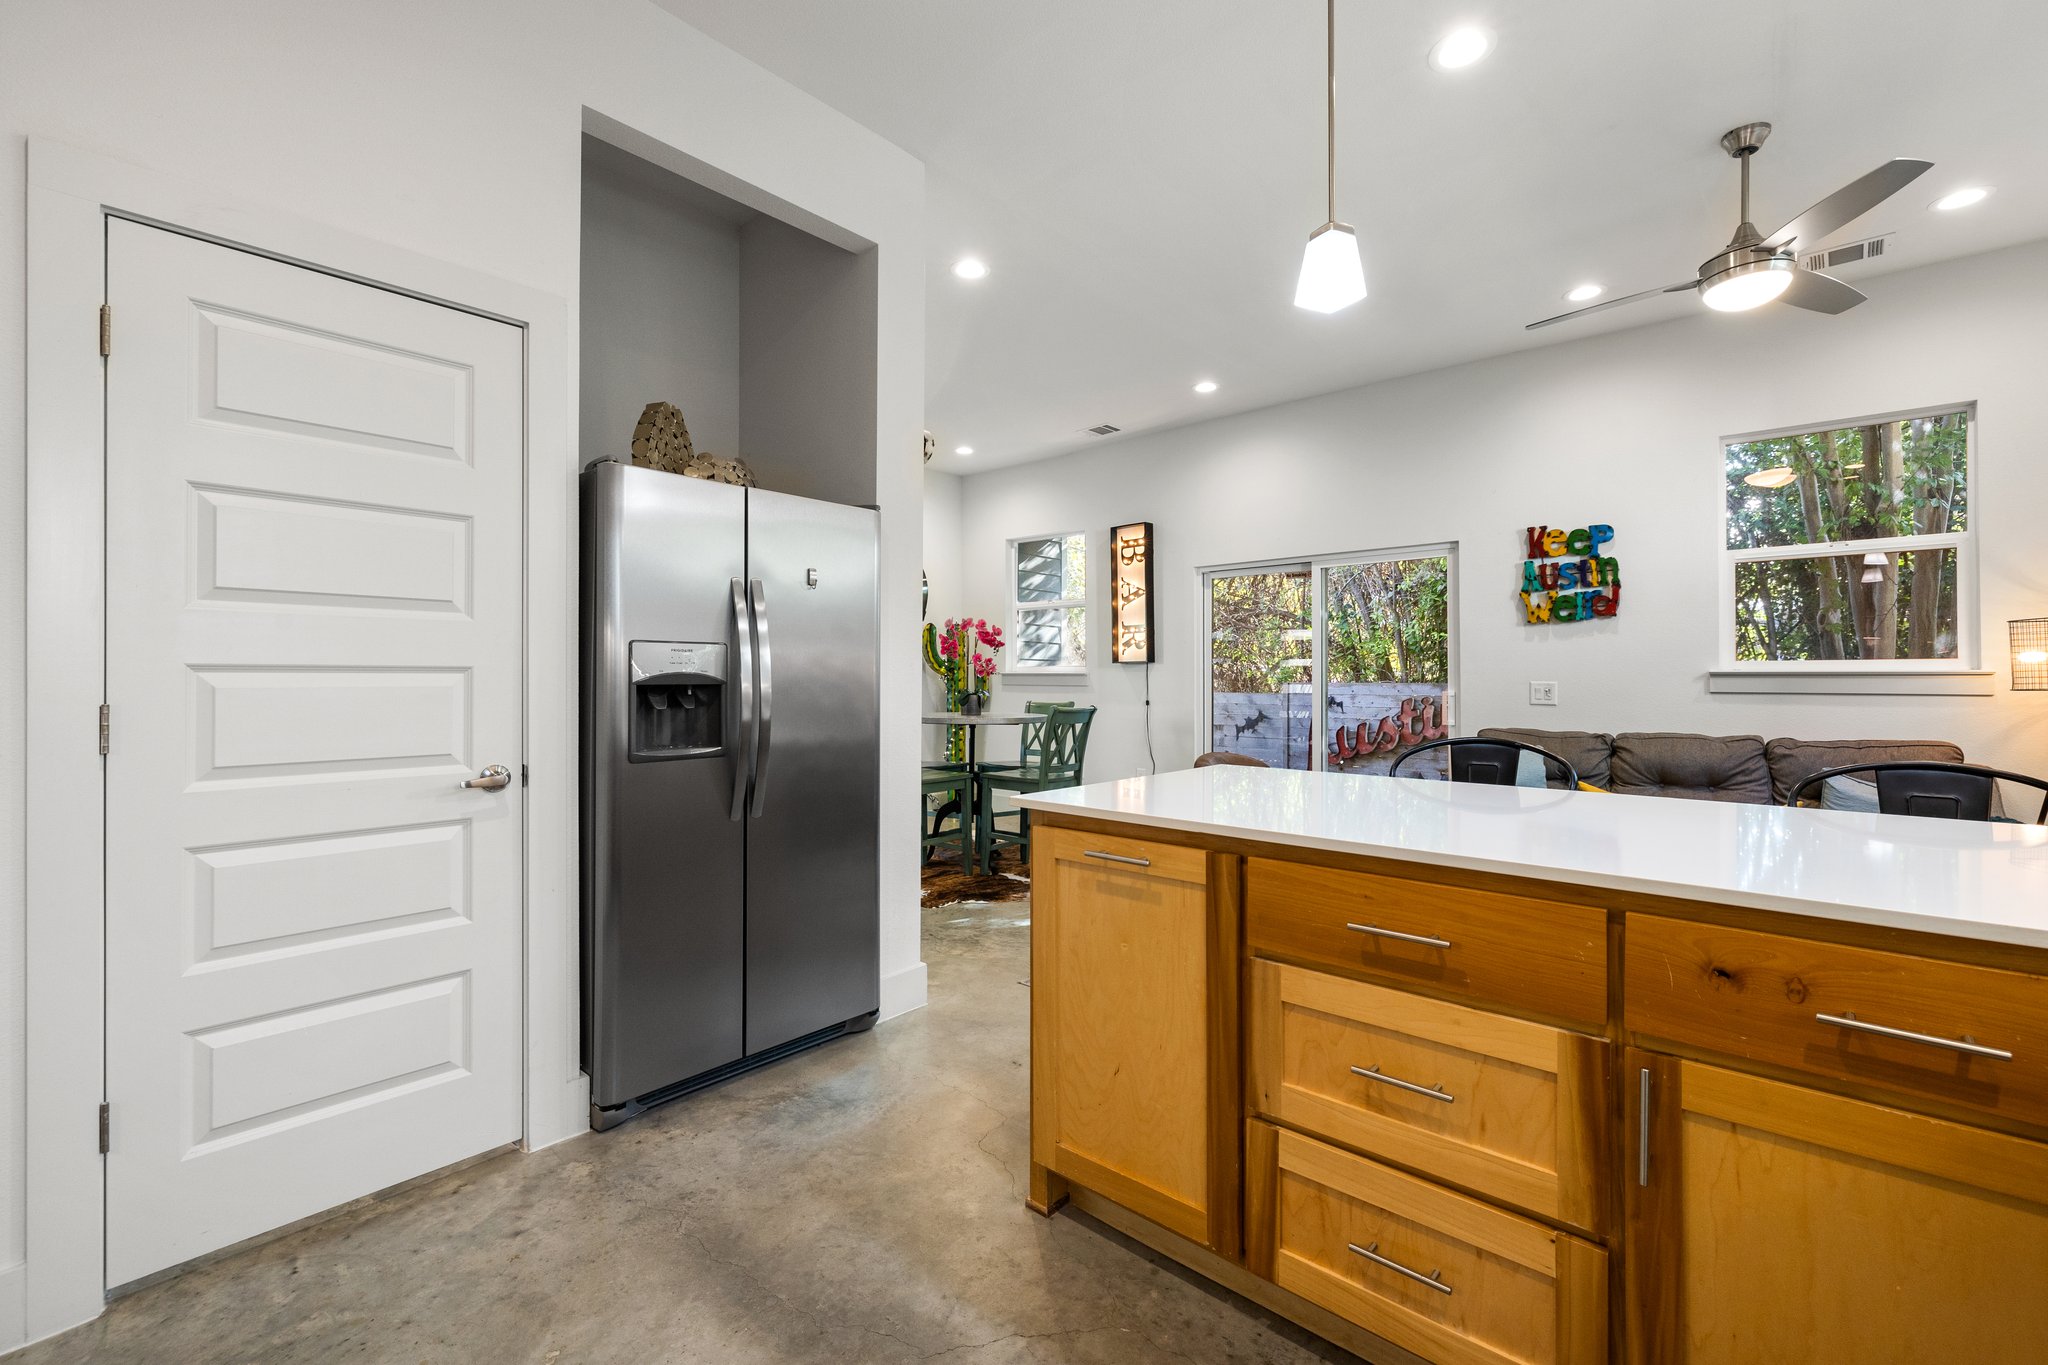 Open floor plan, breakfast bar, and natural light. The "Keep Austin Weird" sign does not convey (is not included in the sale).